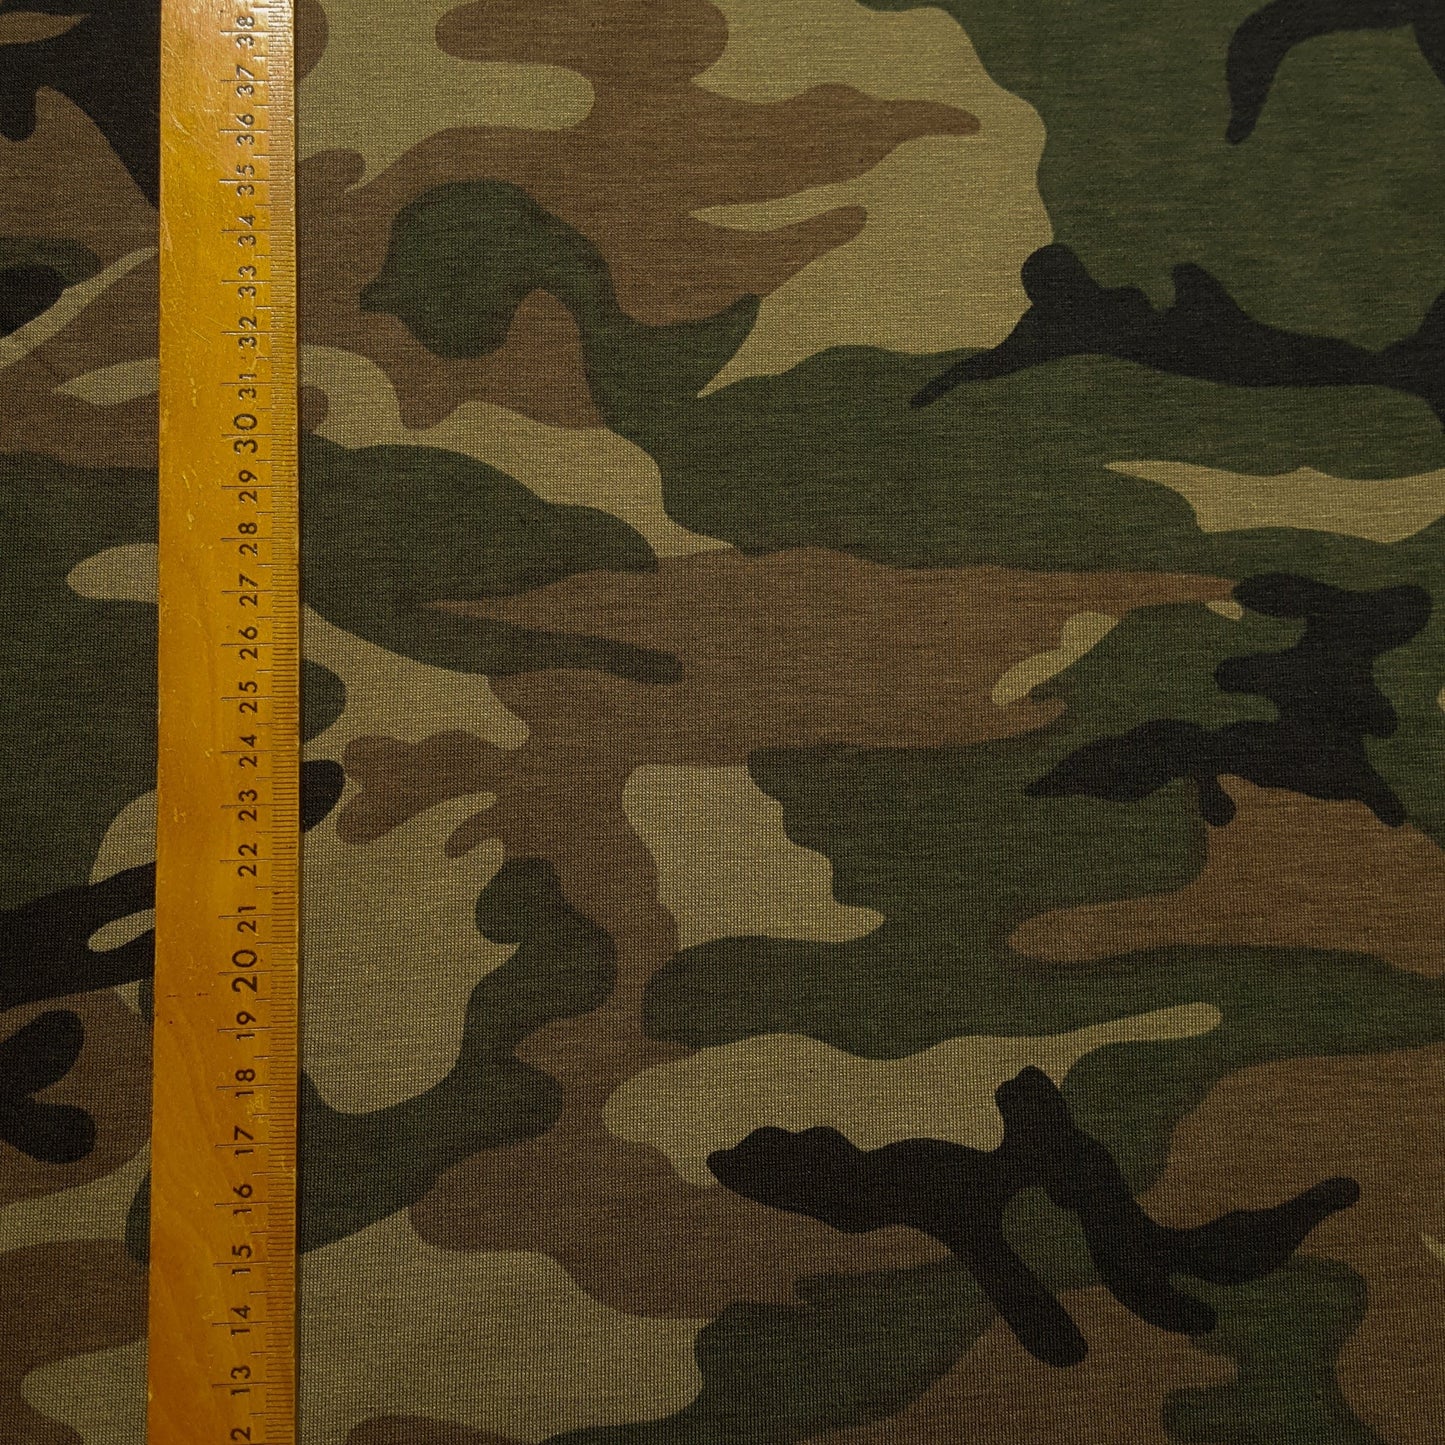 Cotton Single Jersey with Camouflage Print in Khaki and Brown